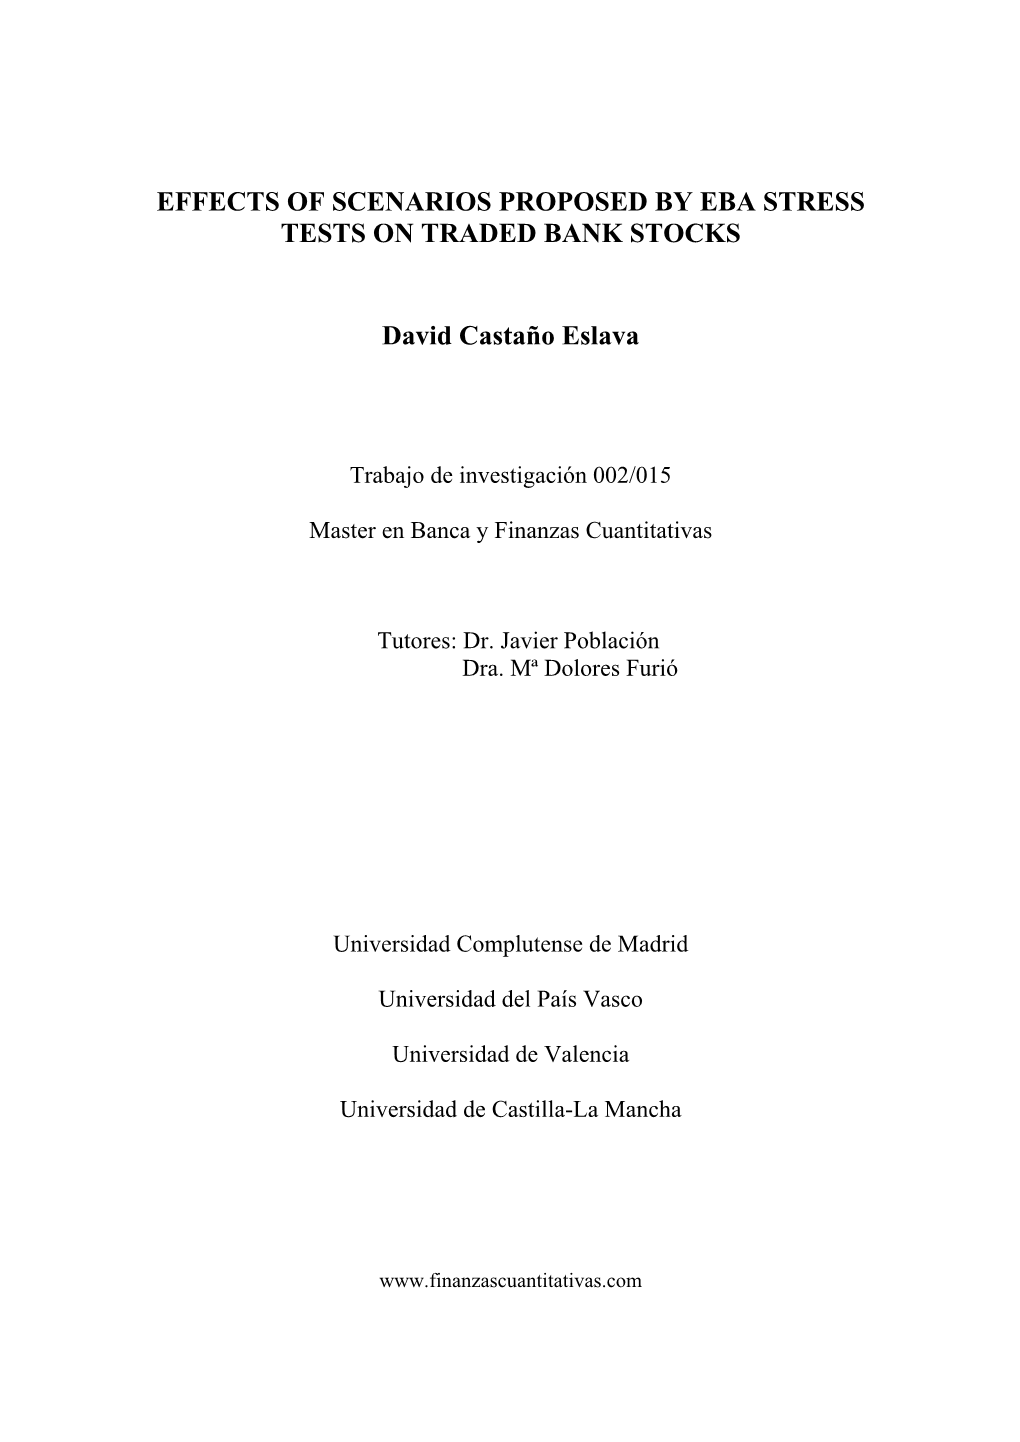 EFFECTS of SCENARIOS PROPOSED by EBA STRESS TESTS on TRADED BANK STOCKS David Castaño Eslava